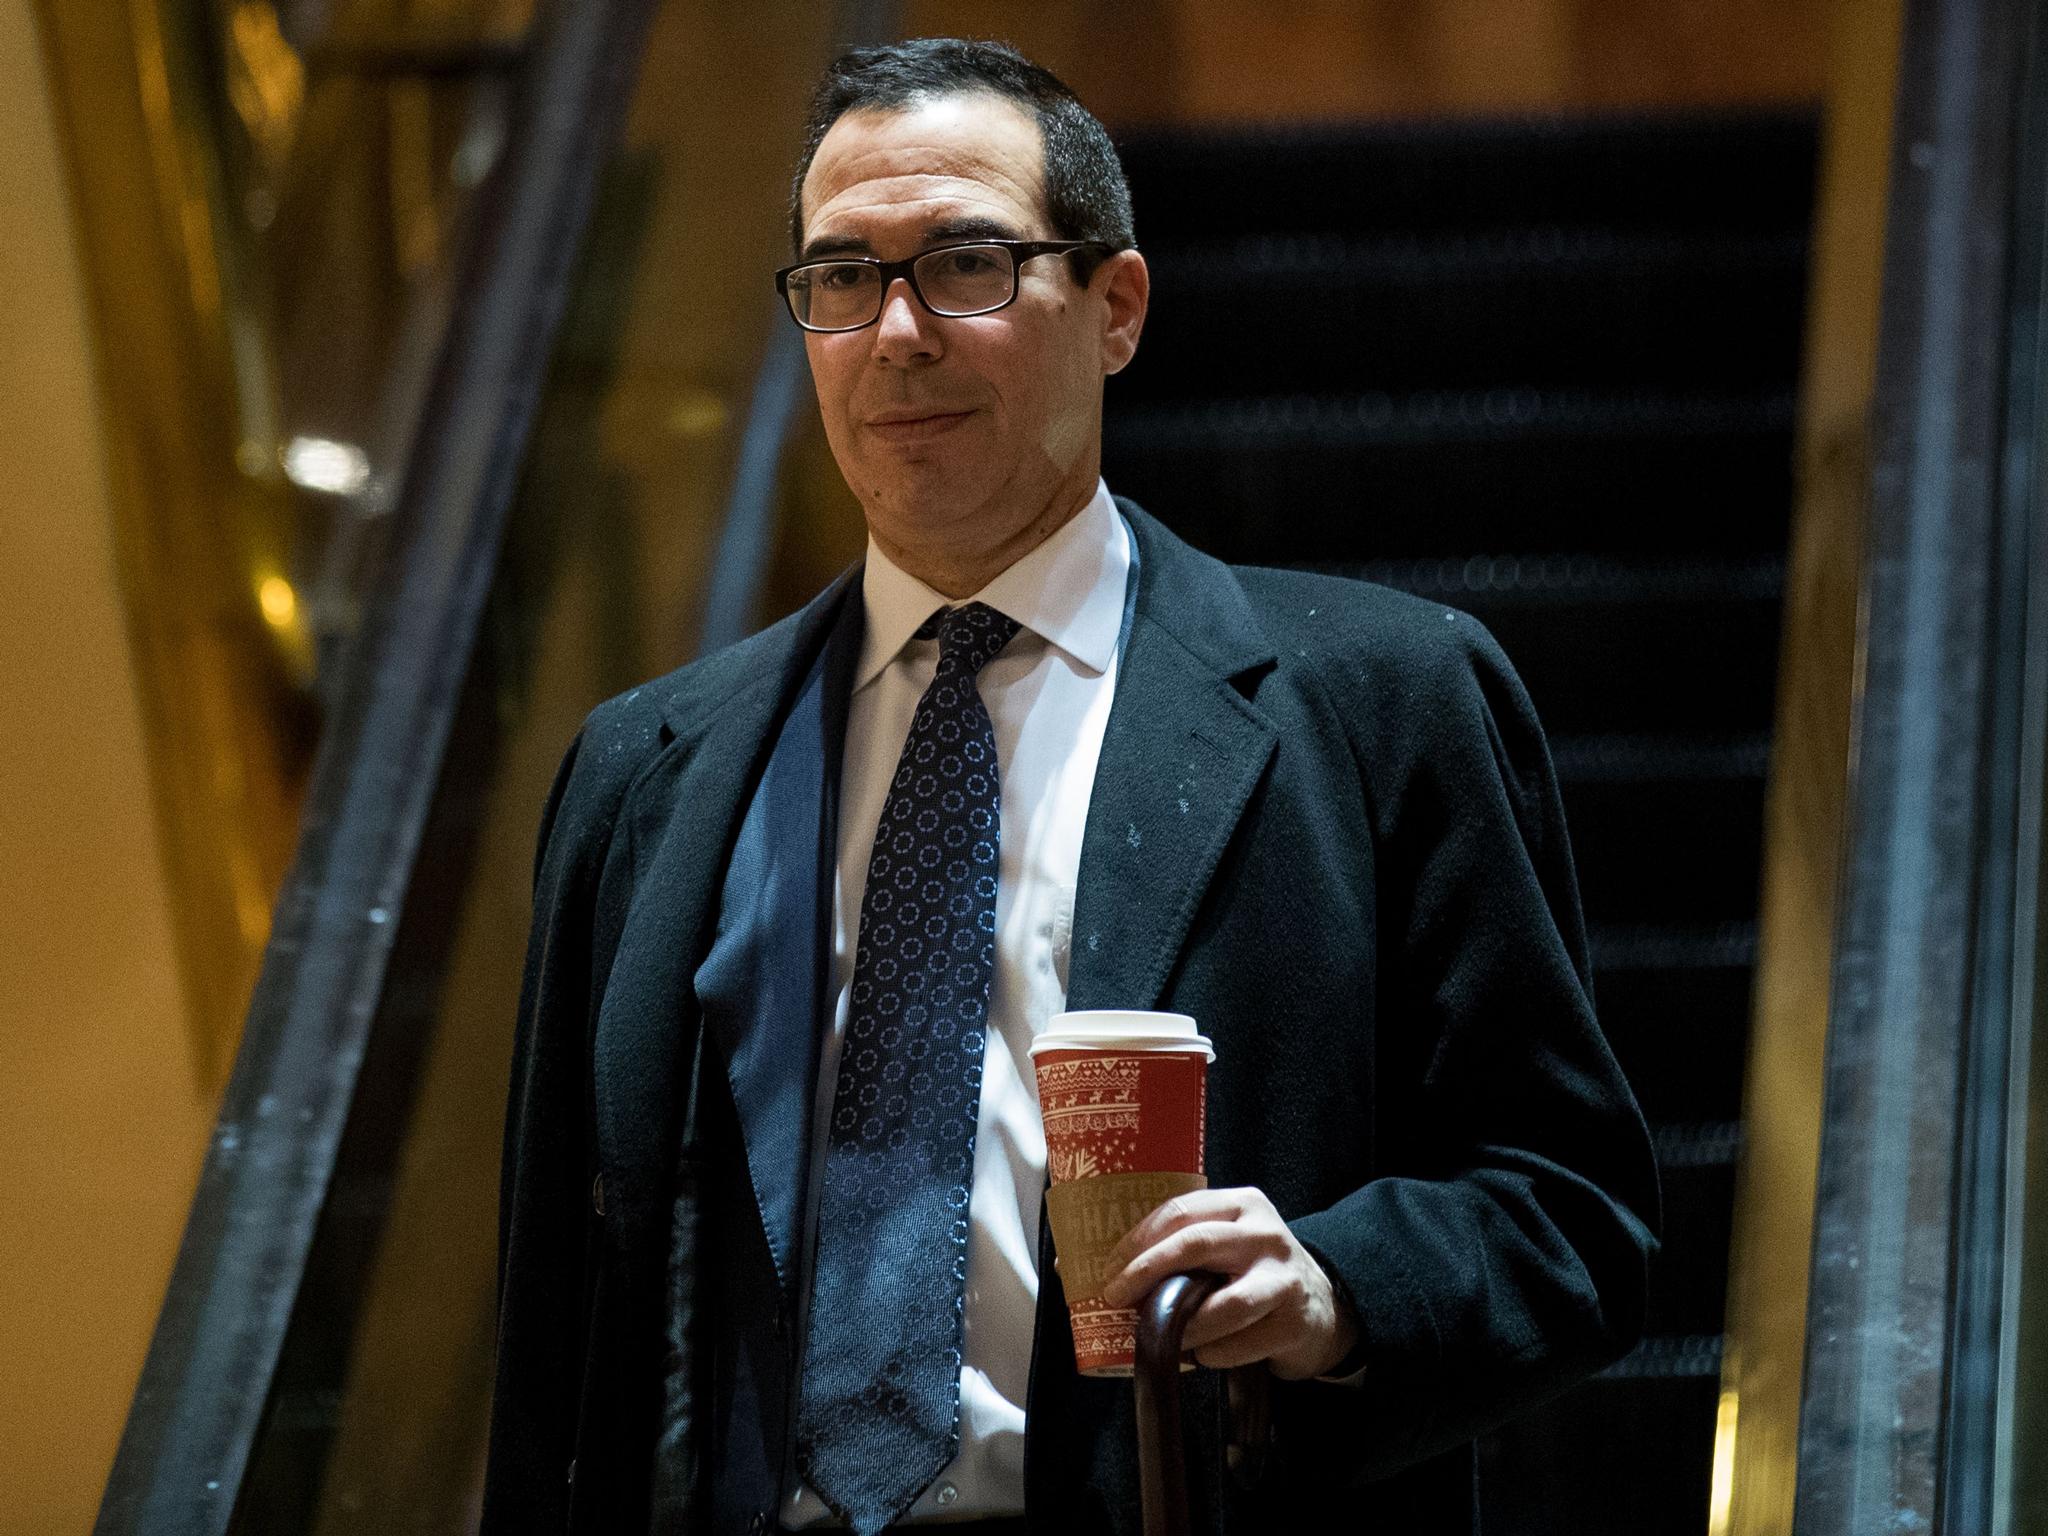 Mr Mnuchin, who was sworn in on 13 February, spent more than a decade and a half at Wall Street bellweather Goldman Sachs